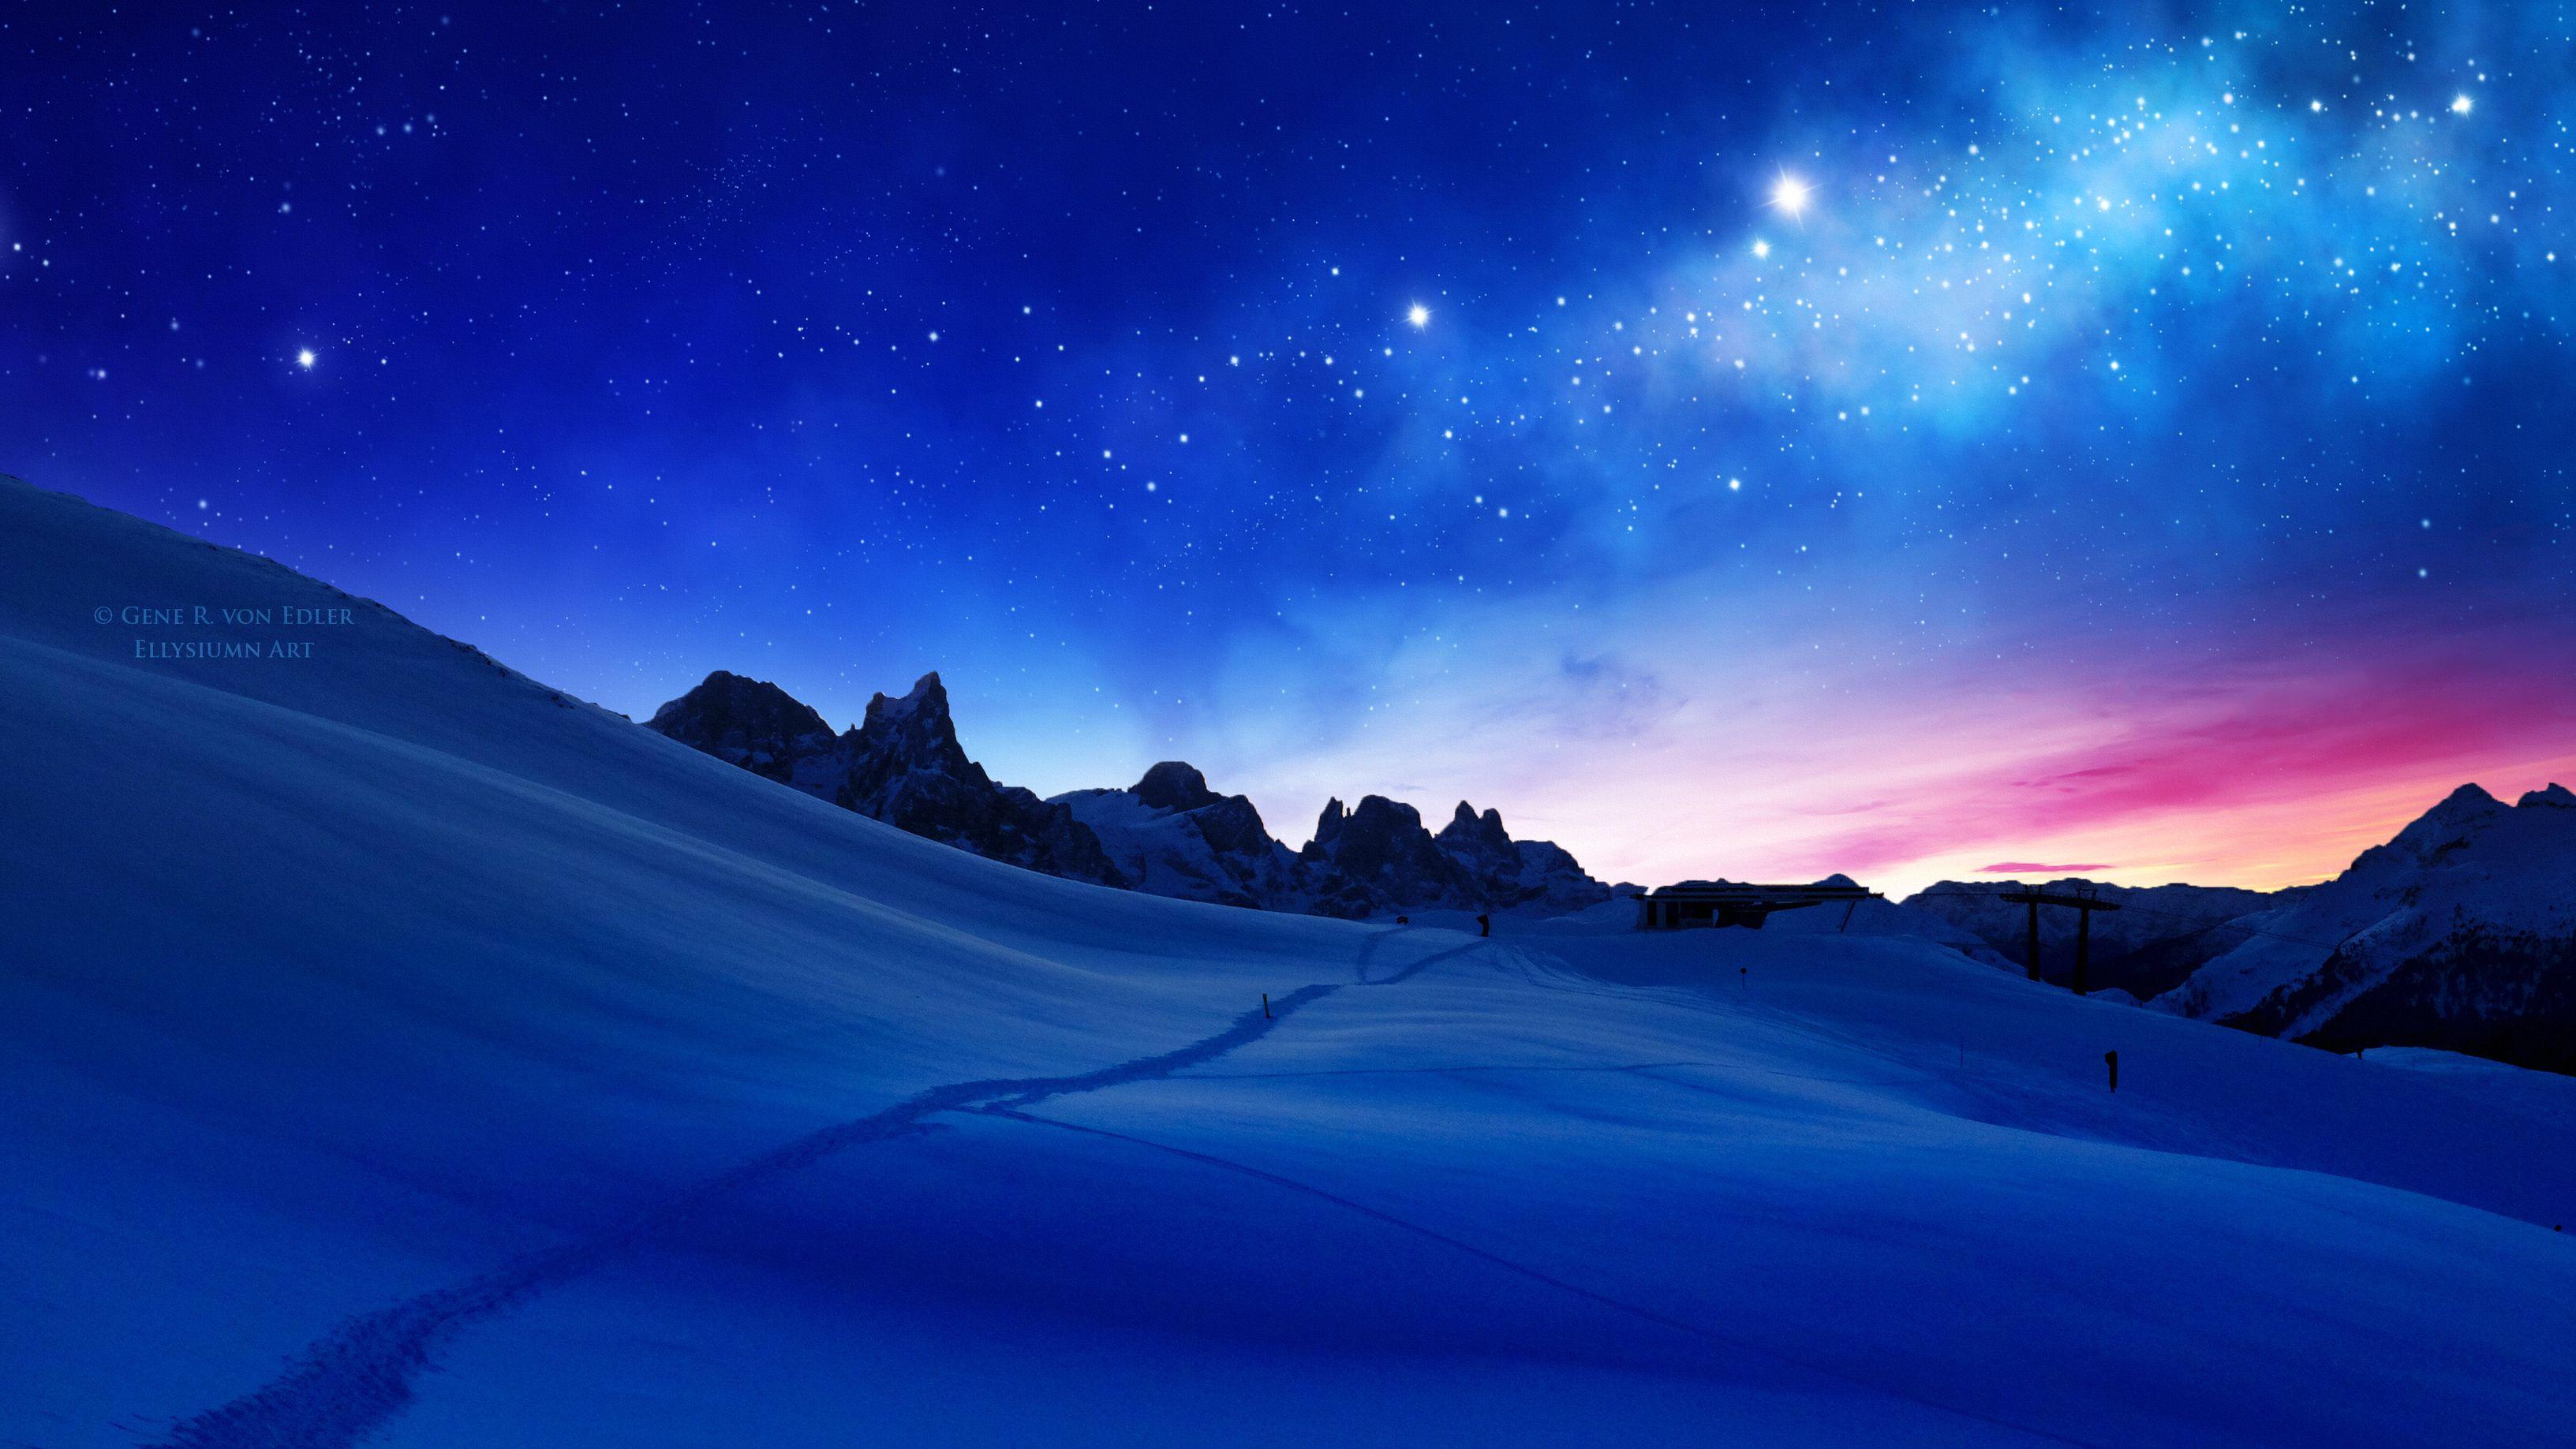 4K PC & Mobile Live Wallpaper - Blue Wave In Space #AAVFX Relaxing